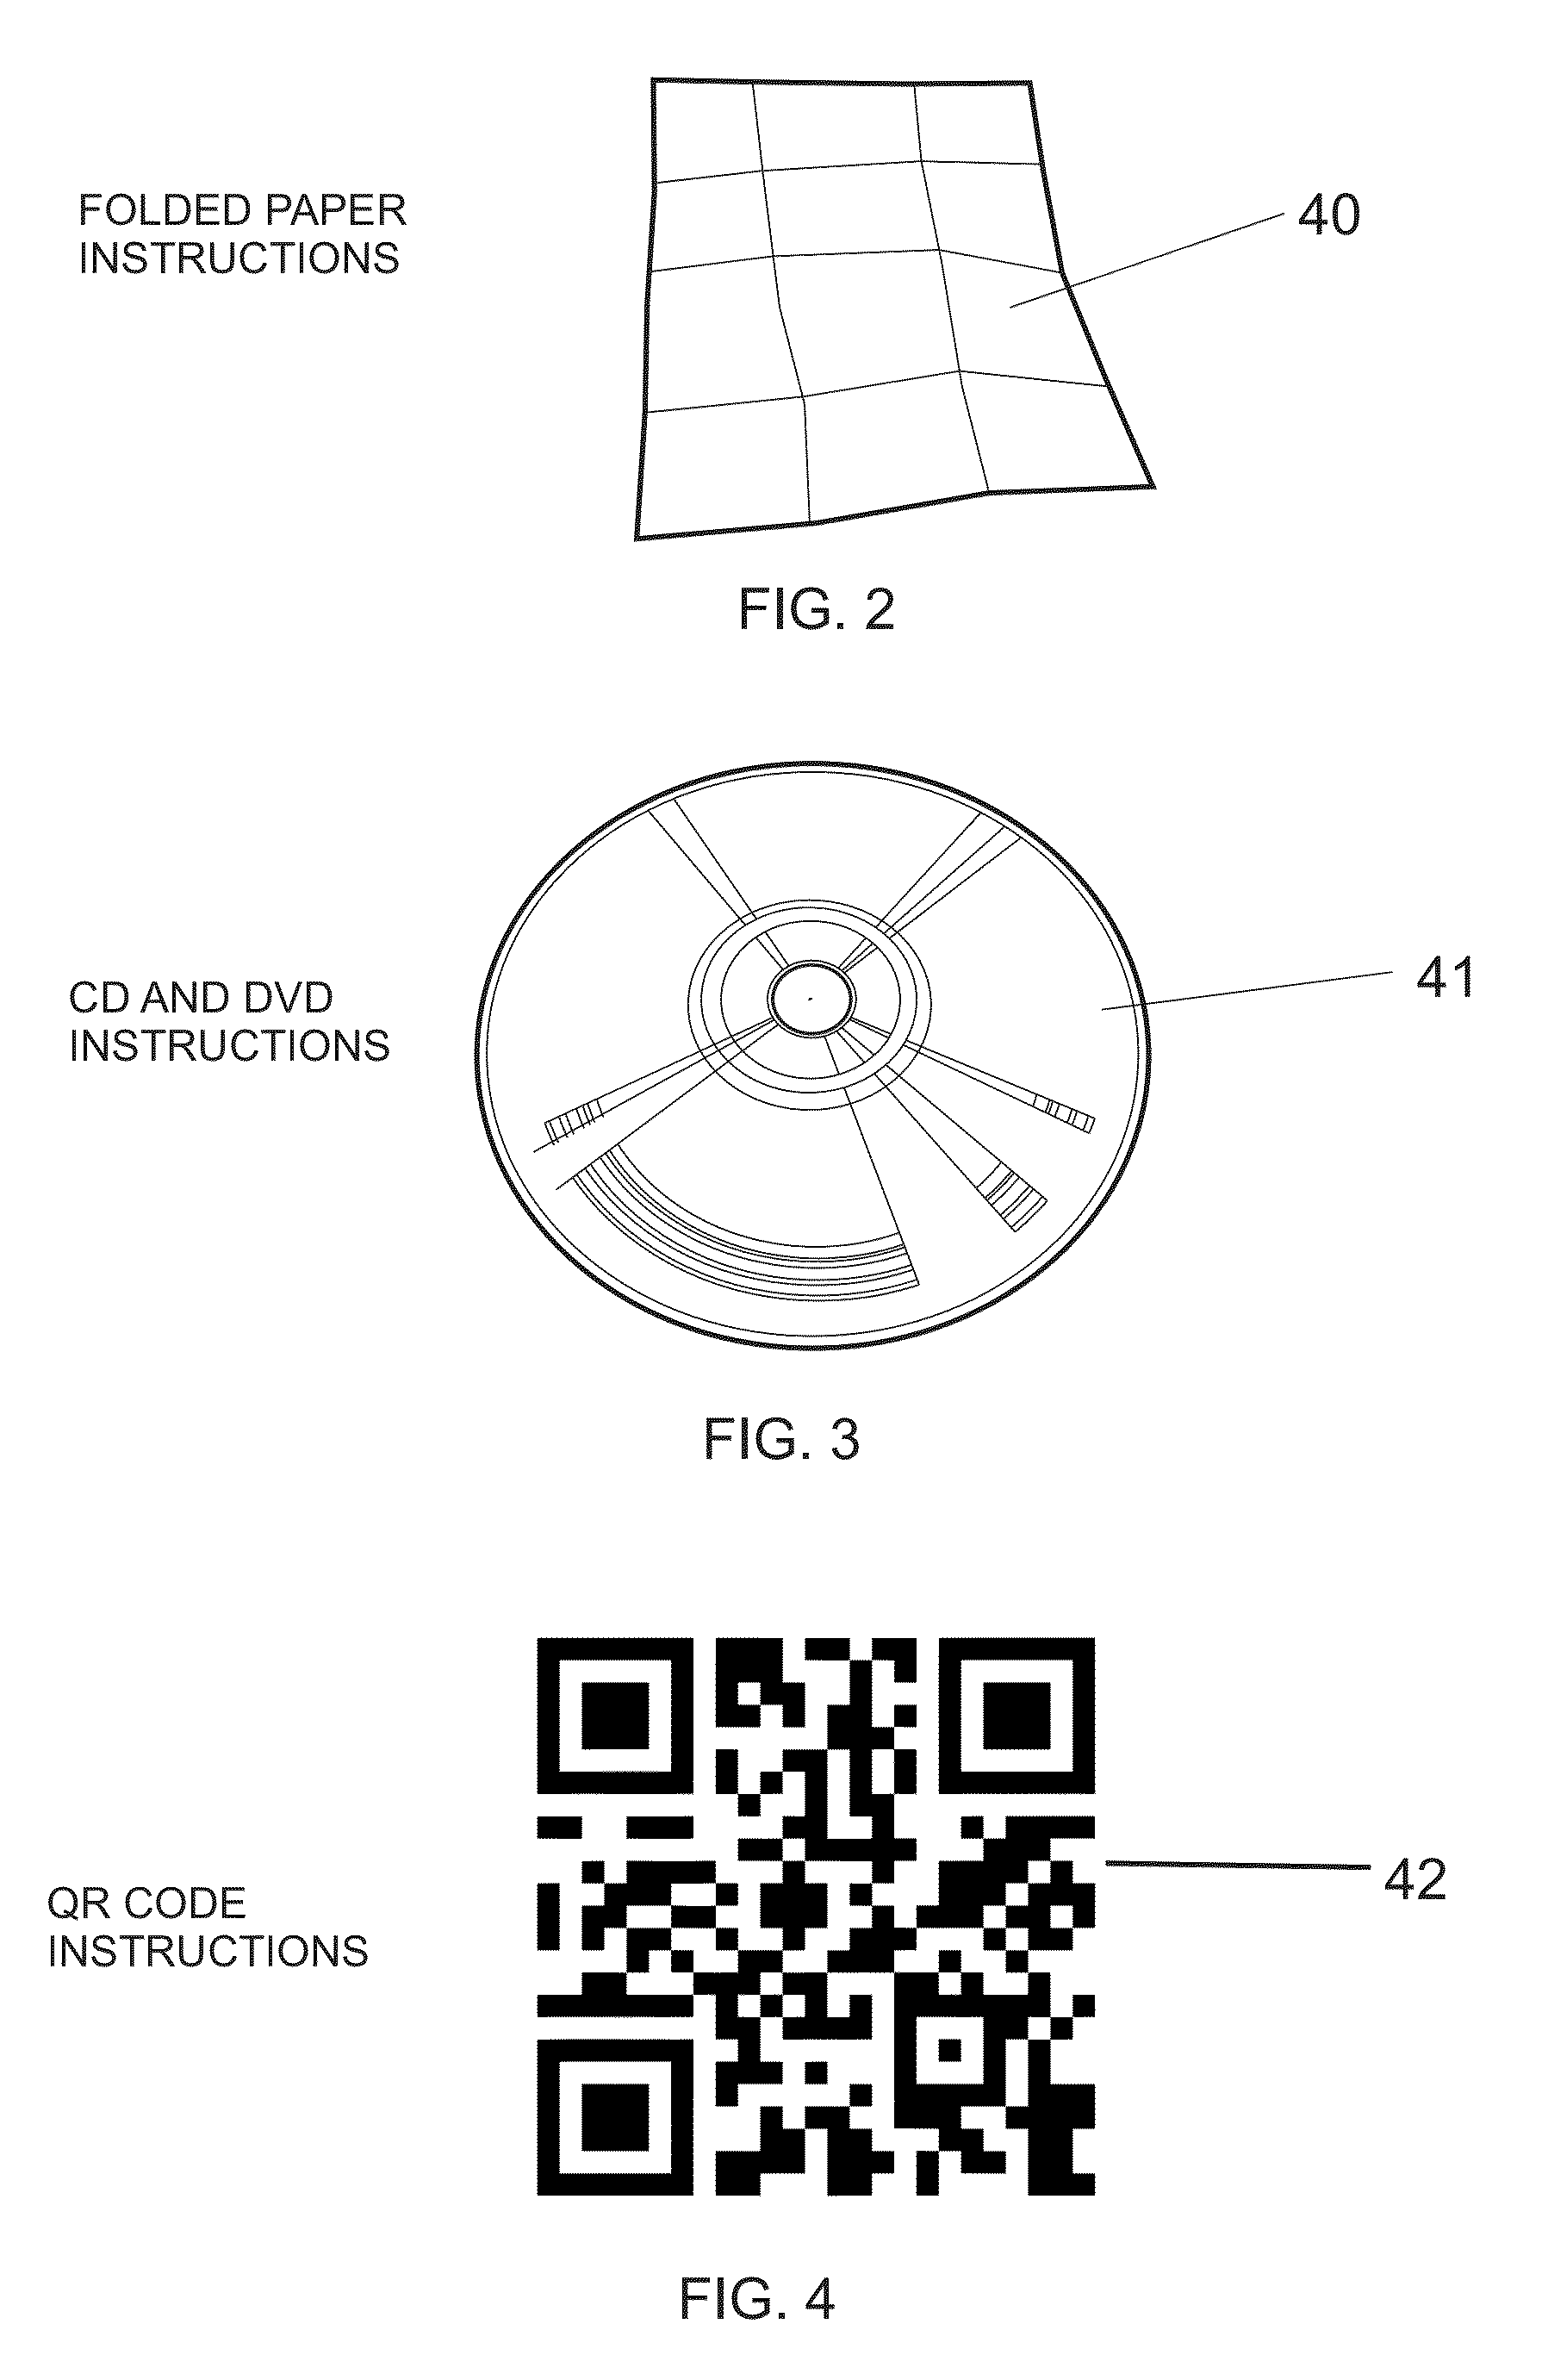 Fiberglass Gel Coat Color Match and Repair System and Method Utilizing a Multi Chamber Dispenser Device